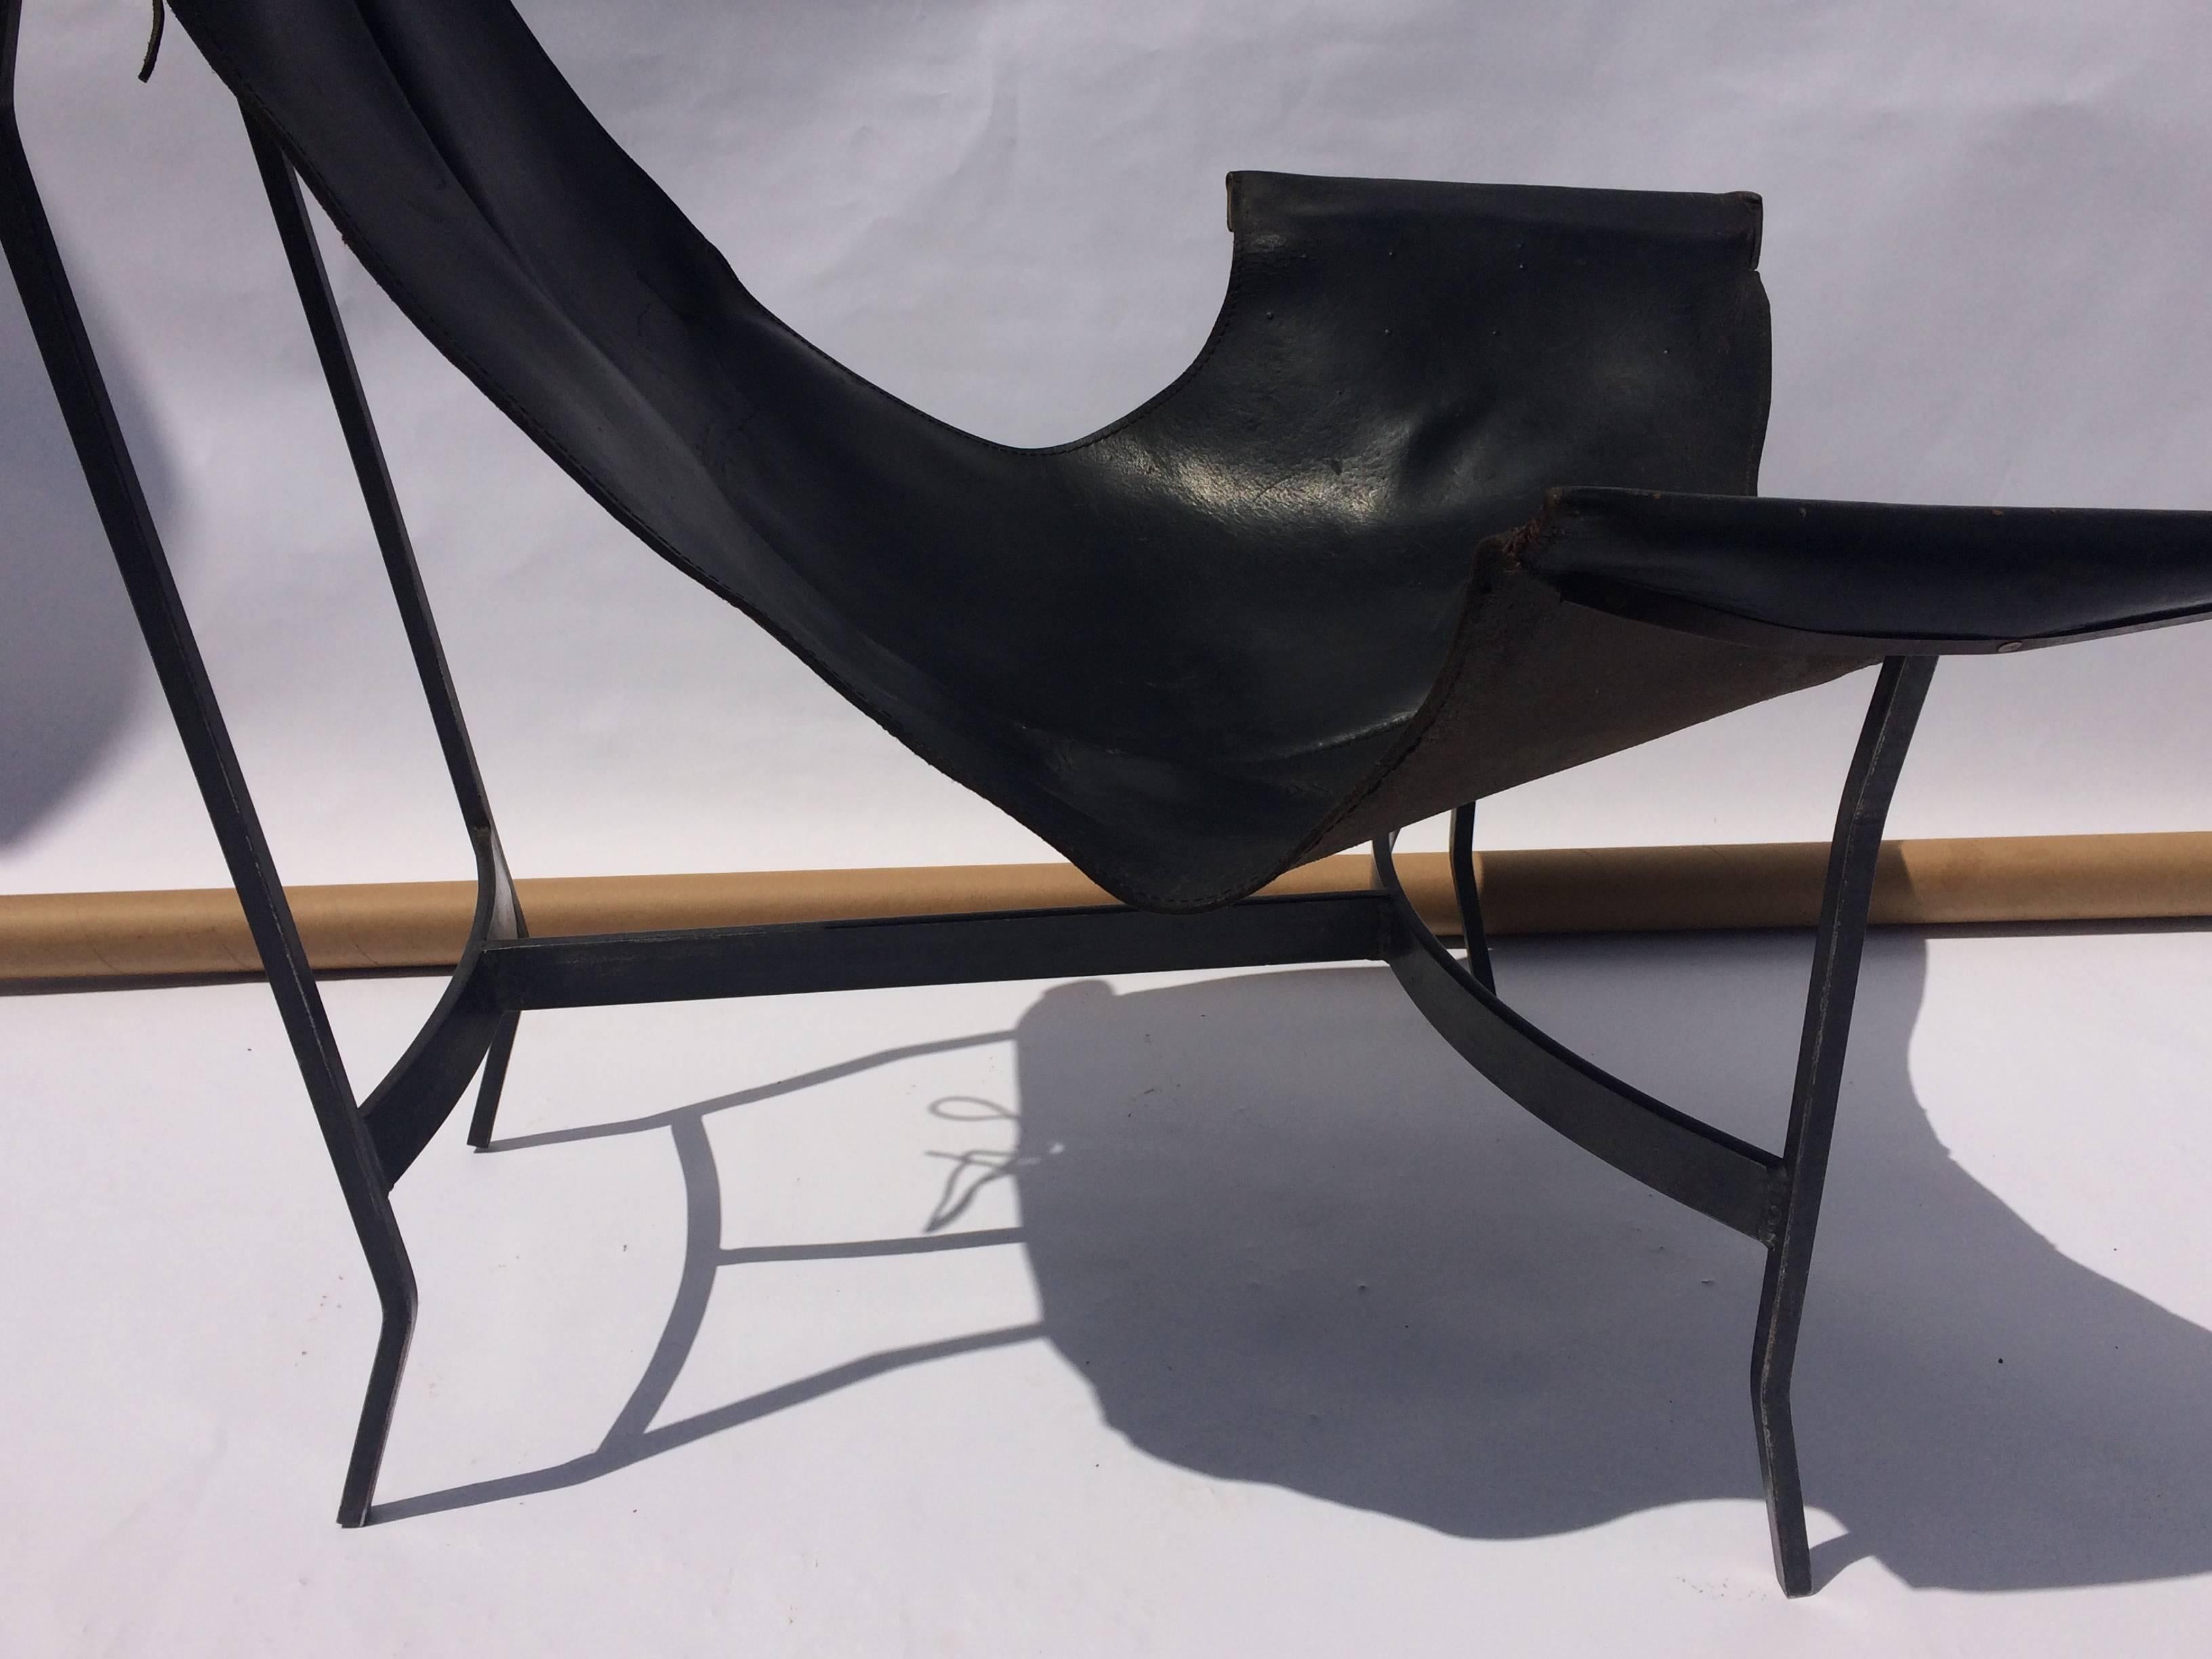 Leather Sling Chair by William Katavolos for Leathercrafter 2